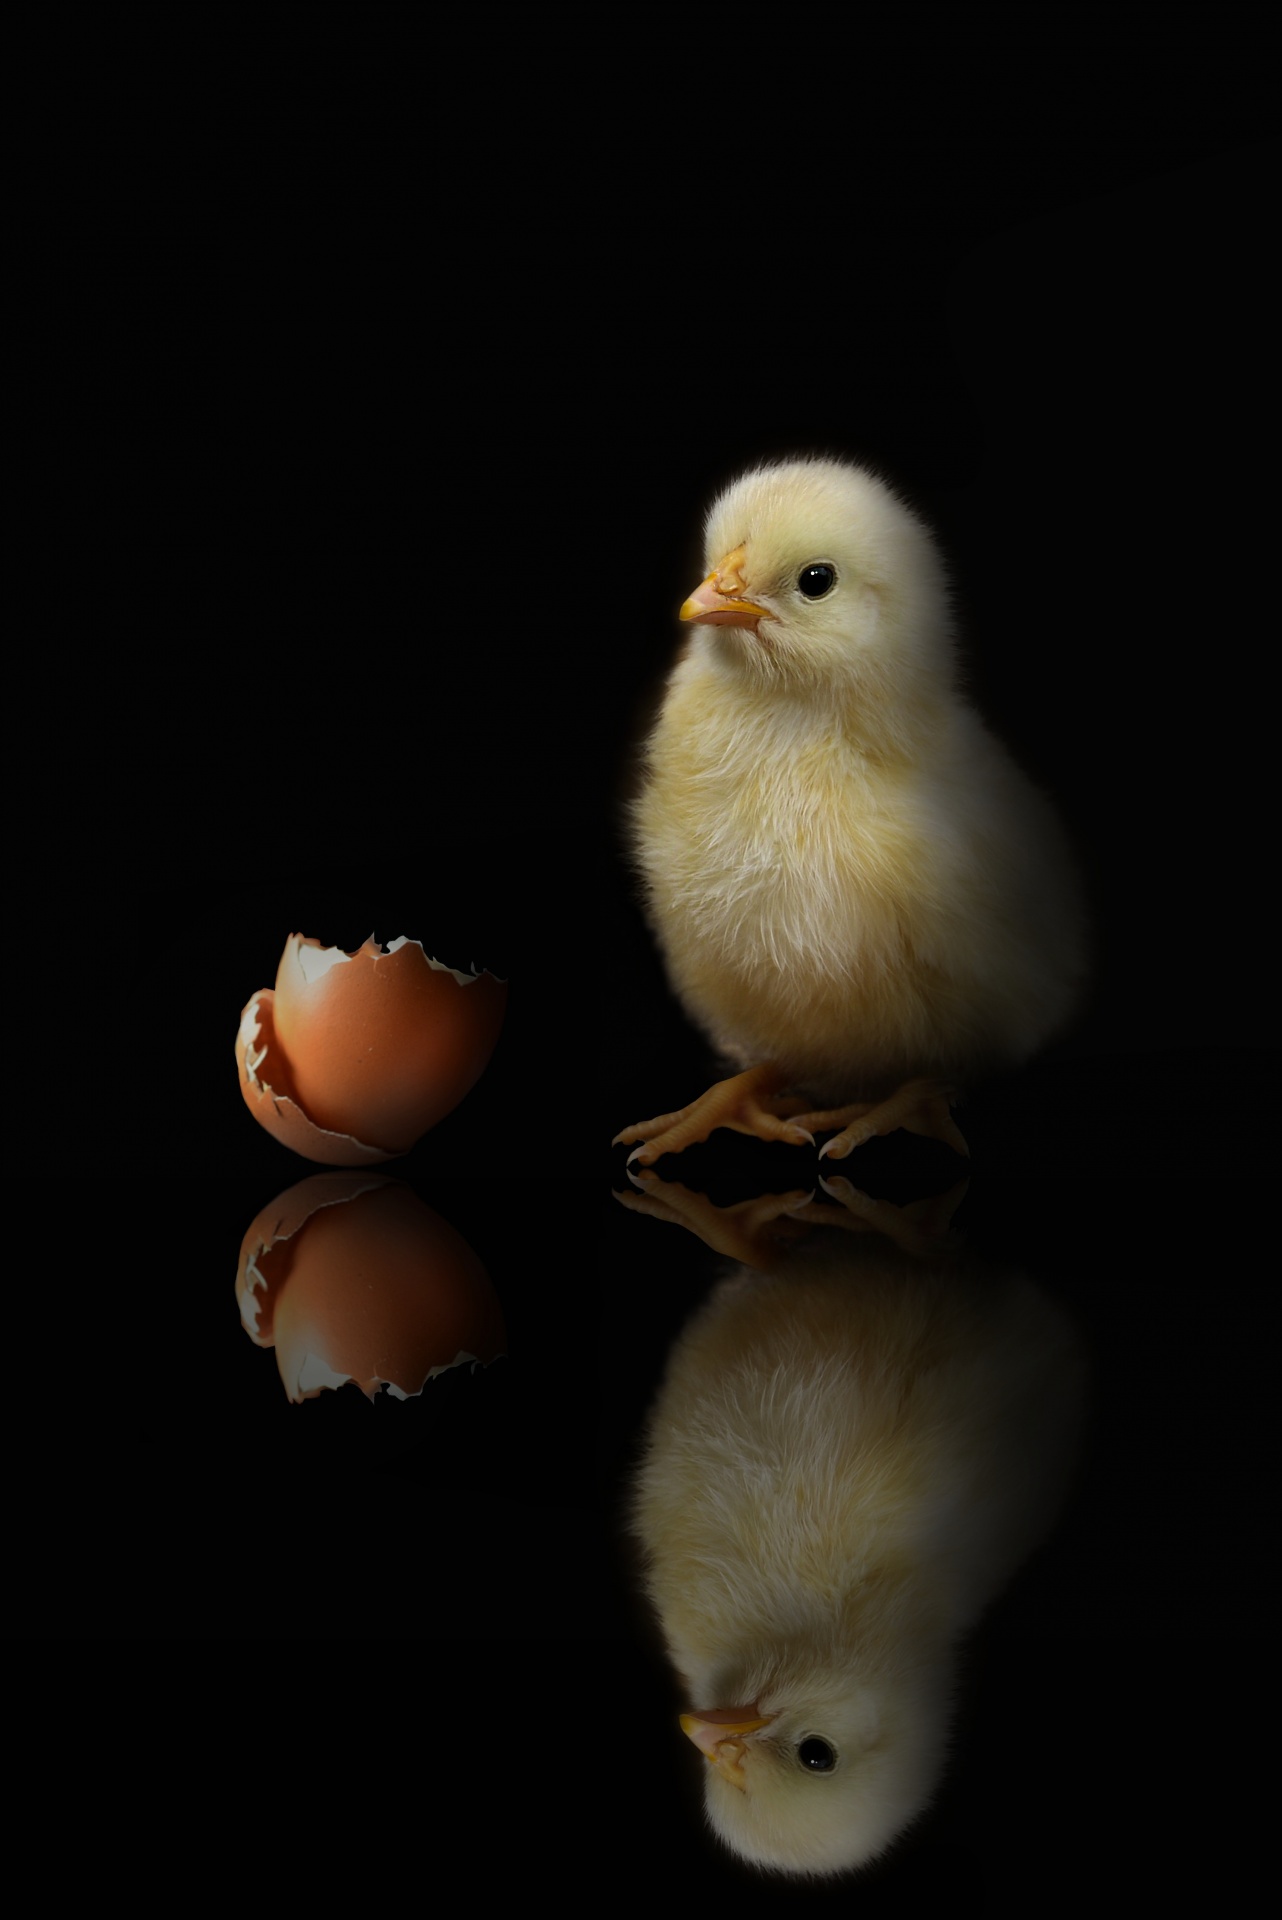 Chick And Shell, Black Background